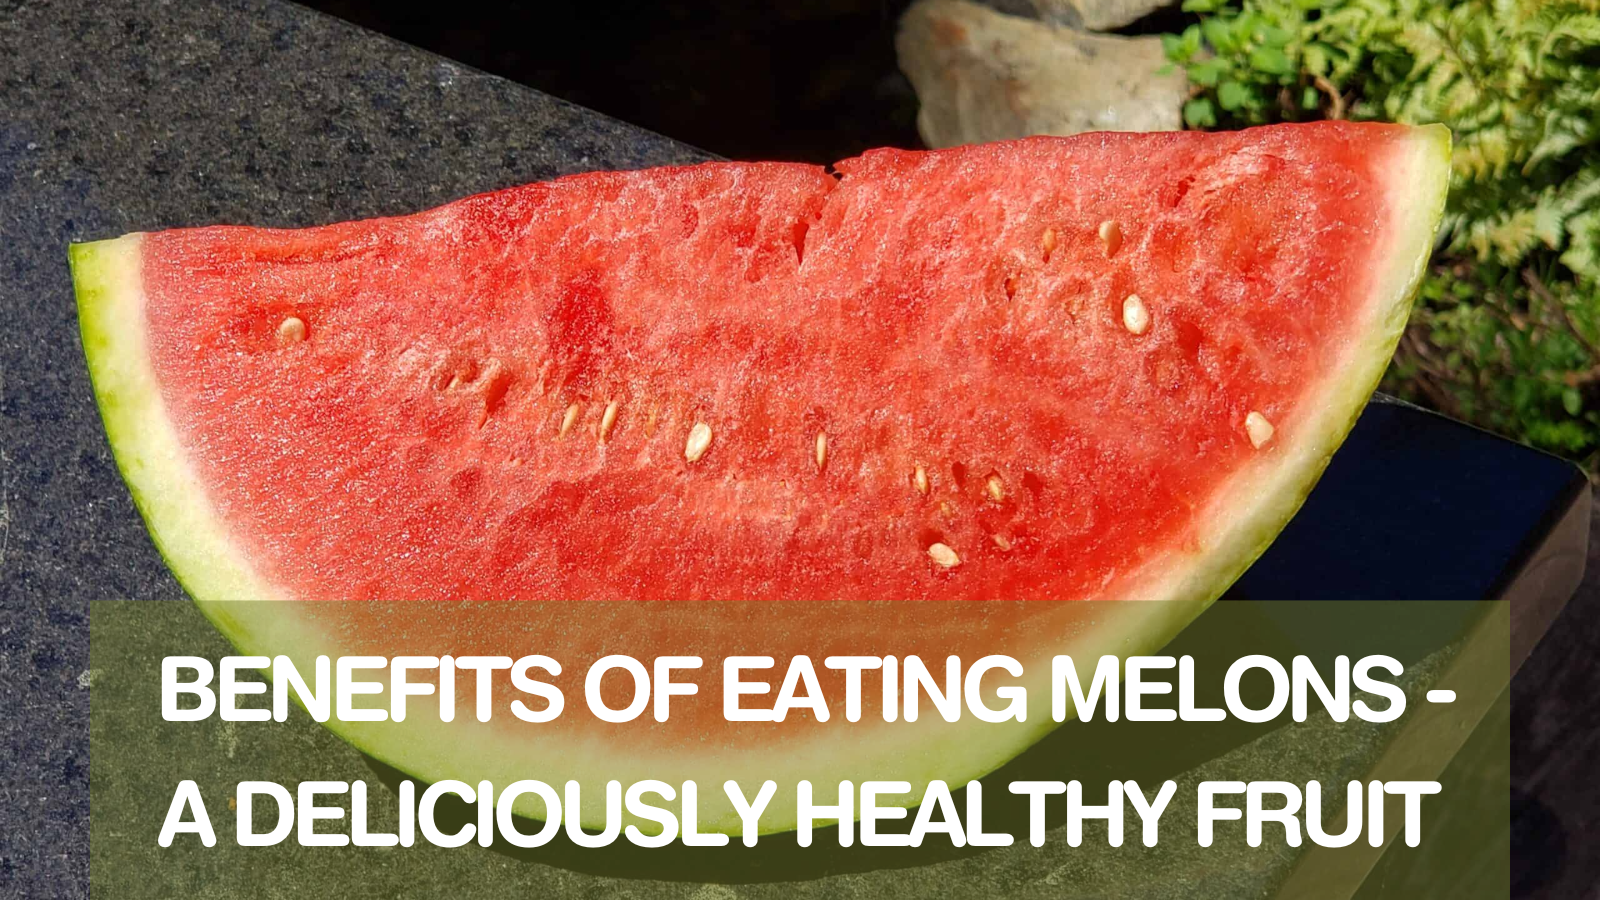 Benefits Of Eating Melons - A Delicious & Healthy Fruit